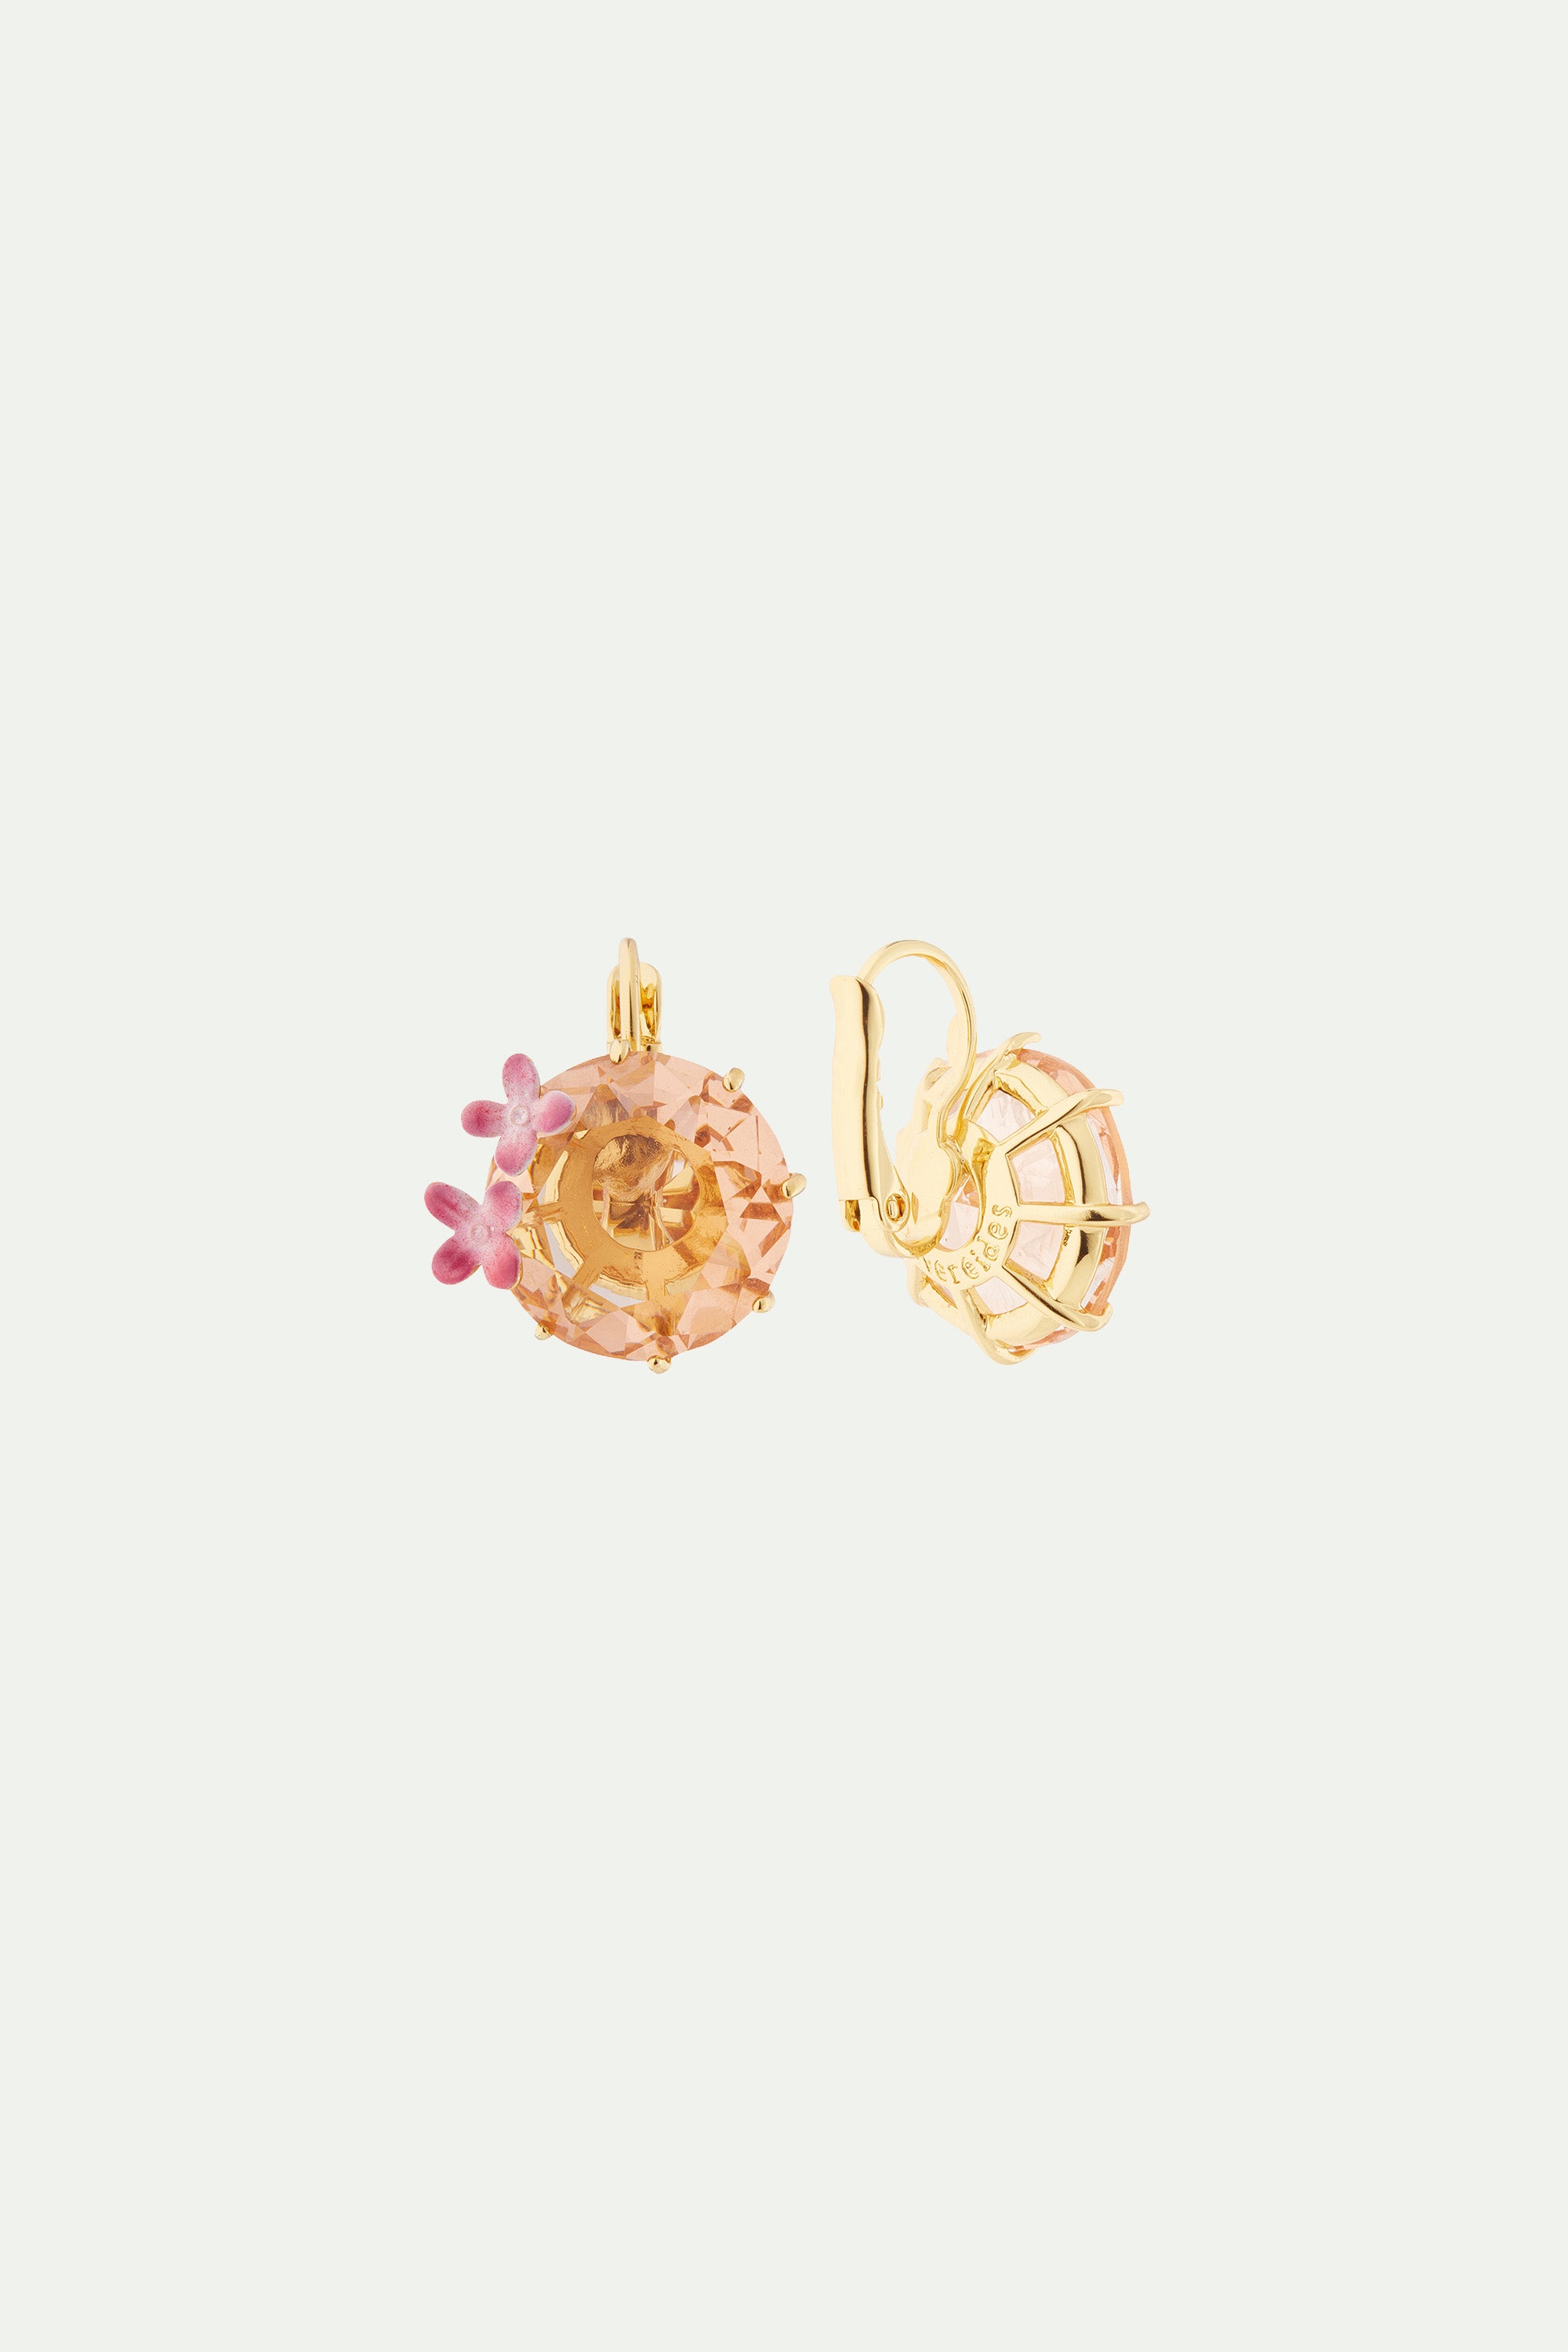 Apricot pink diamantine flower and round stone sleeper earrings